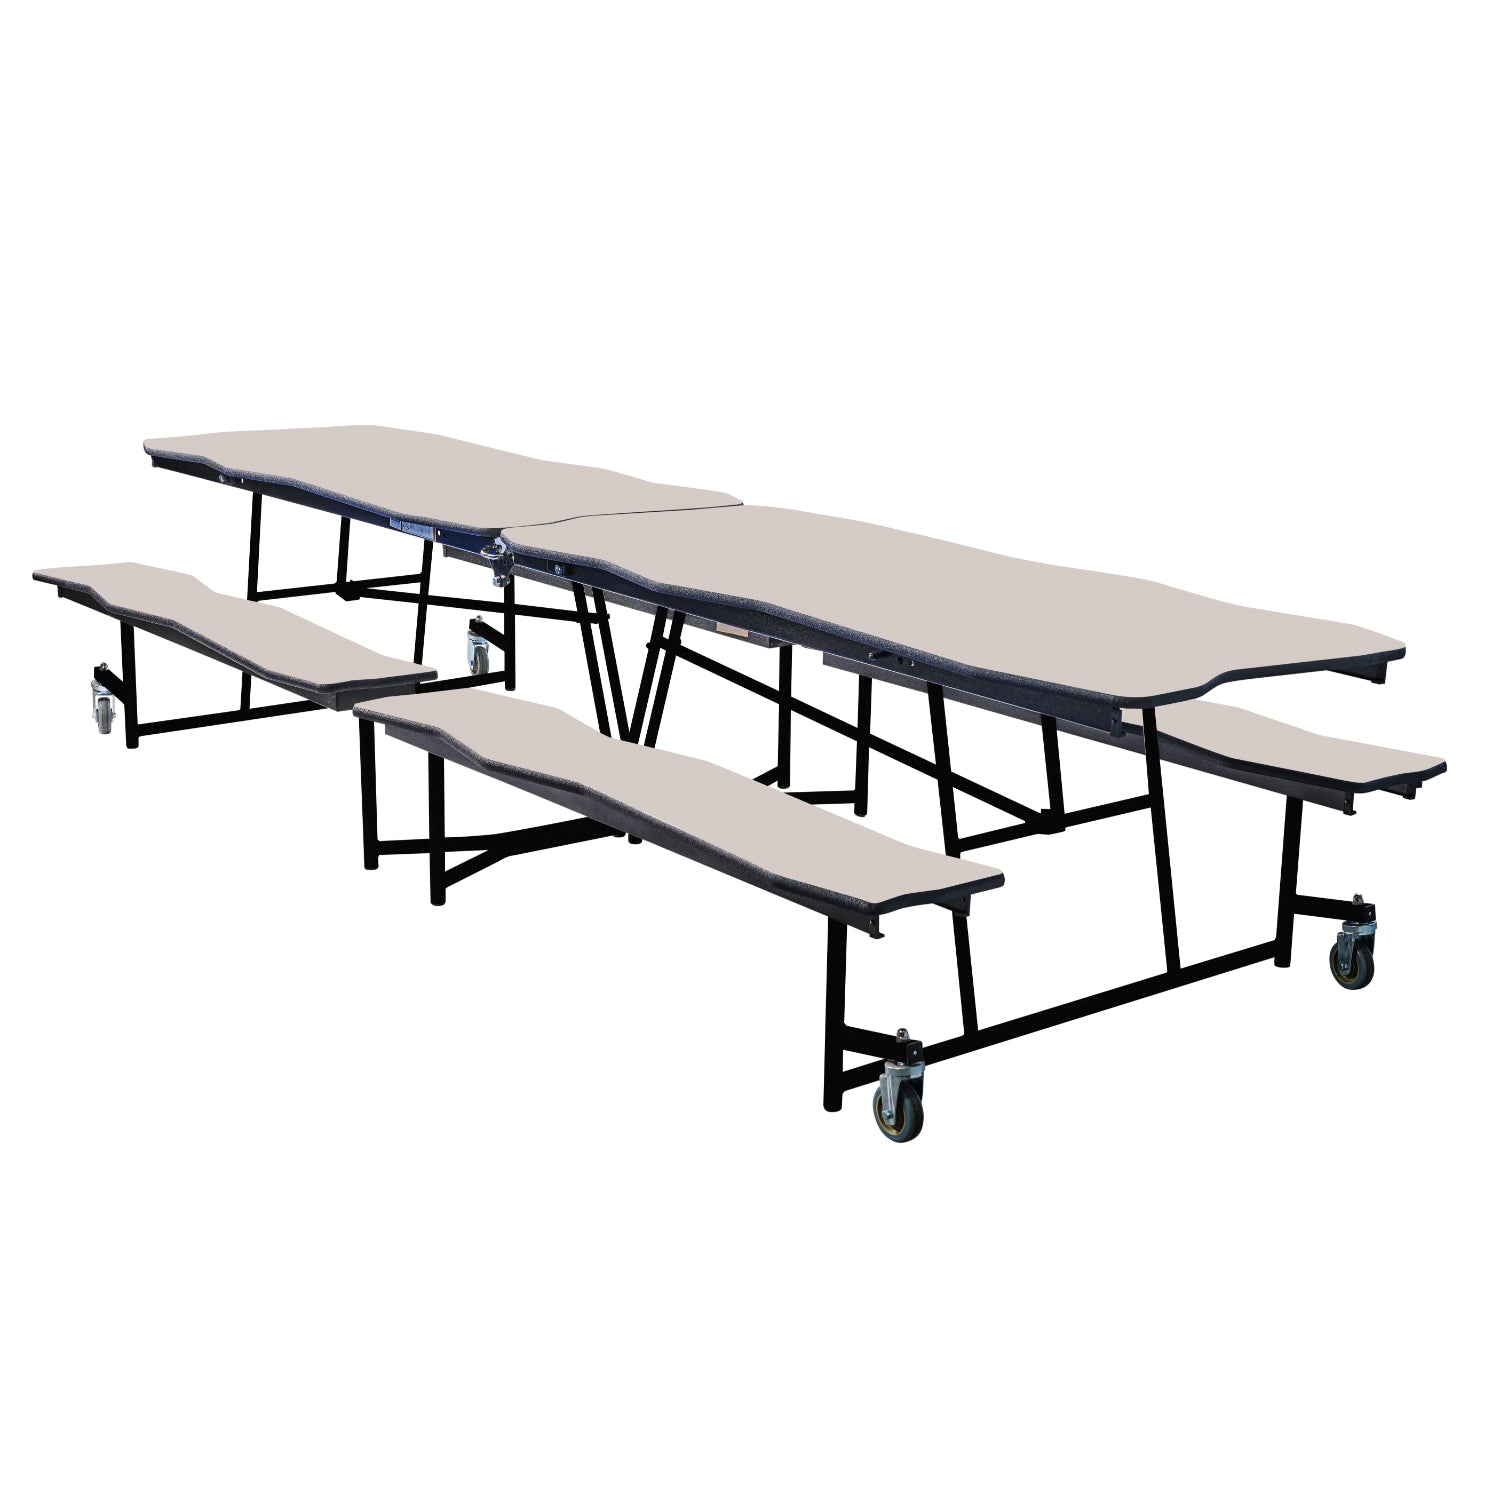 Mobile Cafeteria Table with Benches, 12' Bedrock, Plywood Core, Vinyl T-Mold Edge, Textured Black Frame